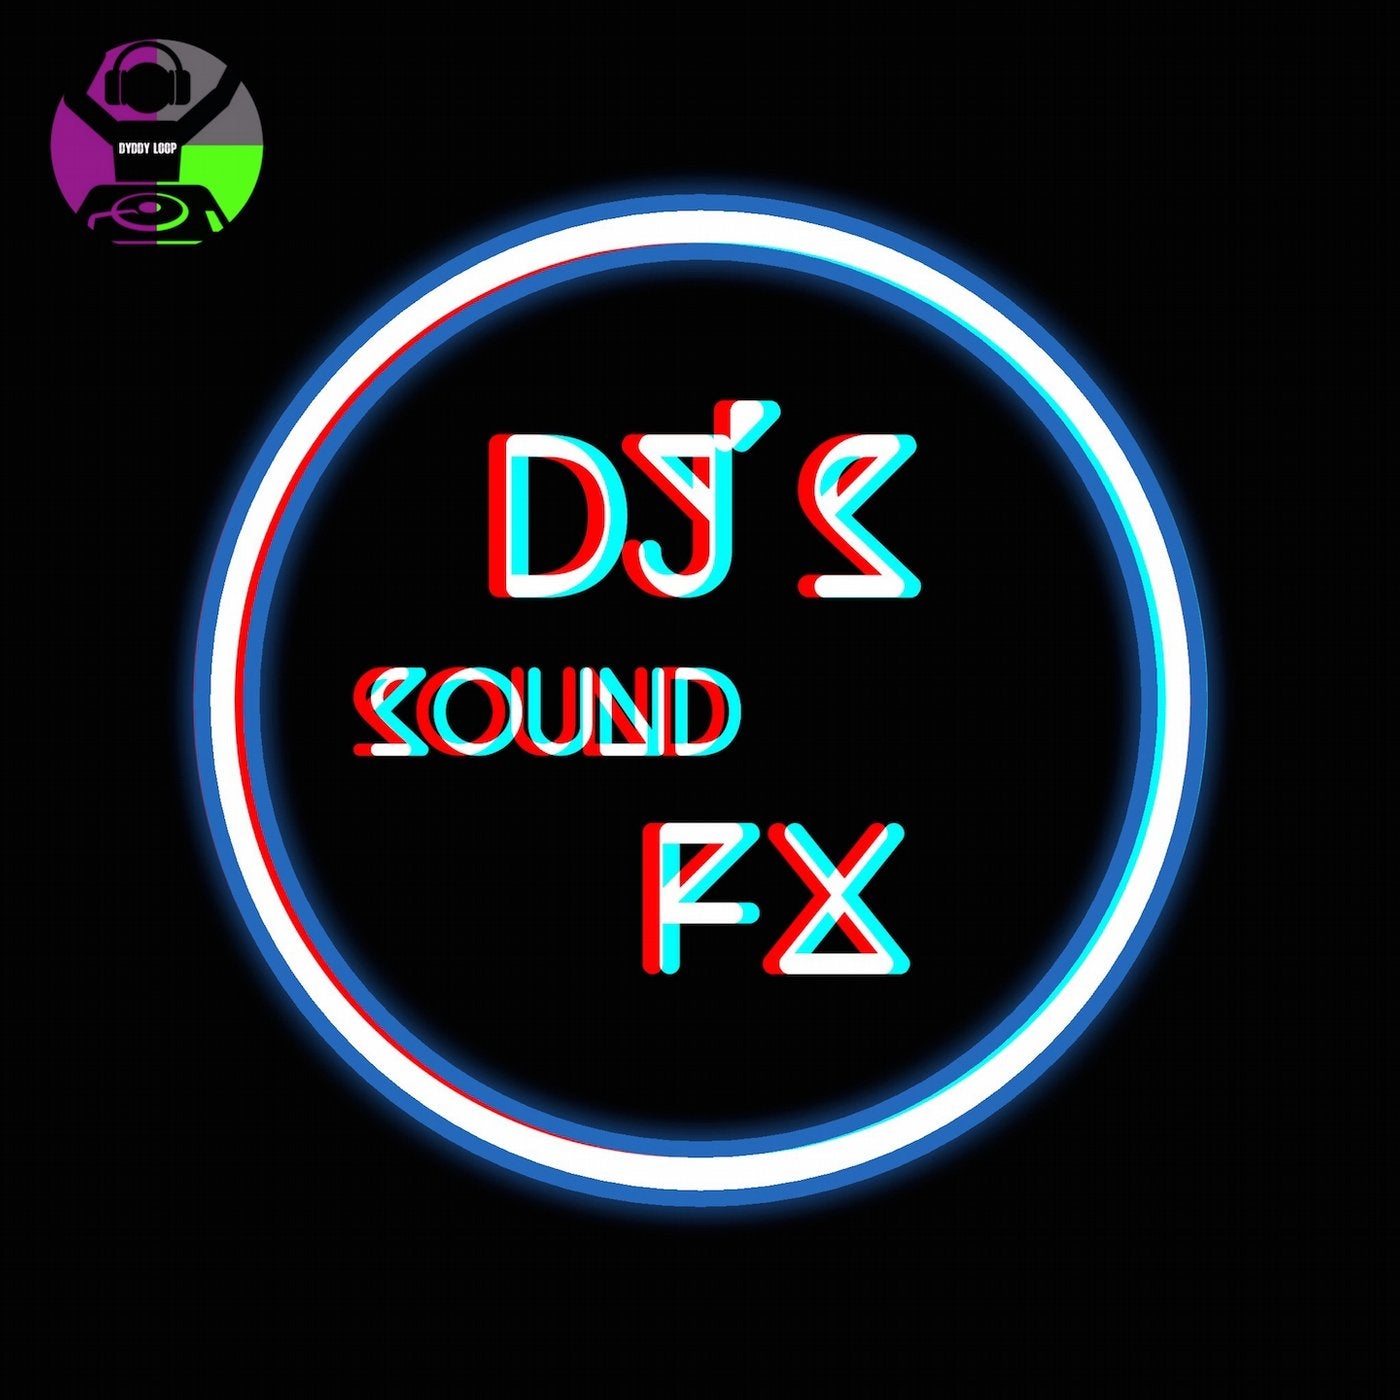 FXSOUND. Only loops